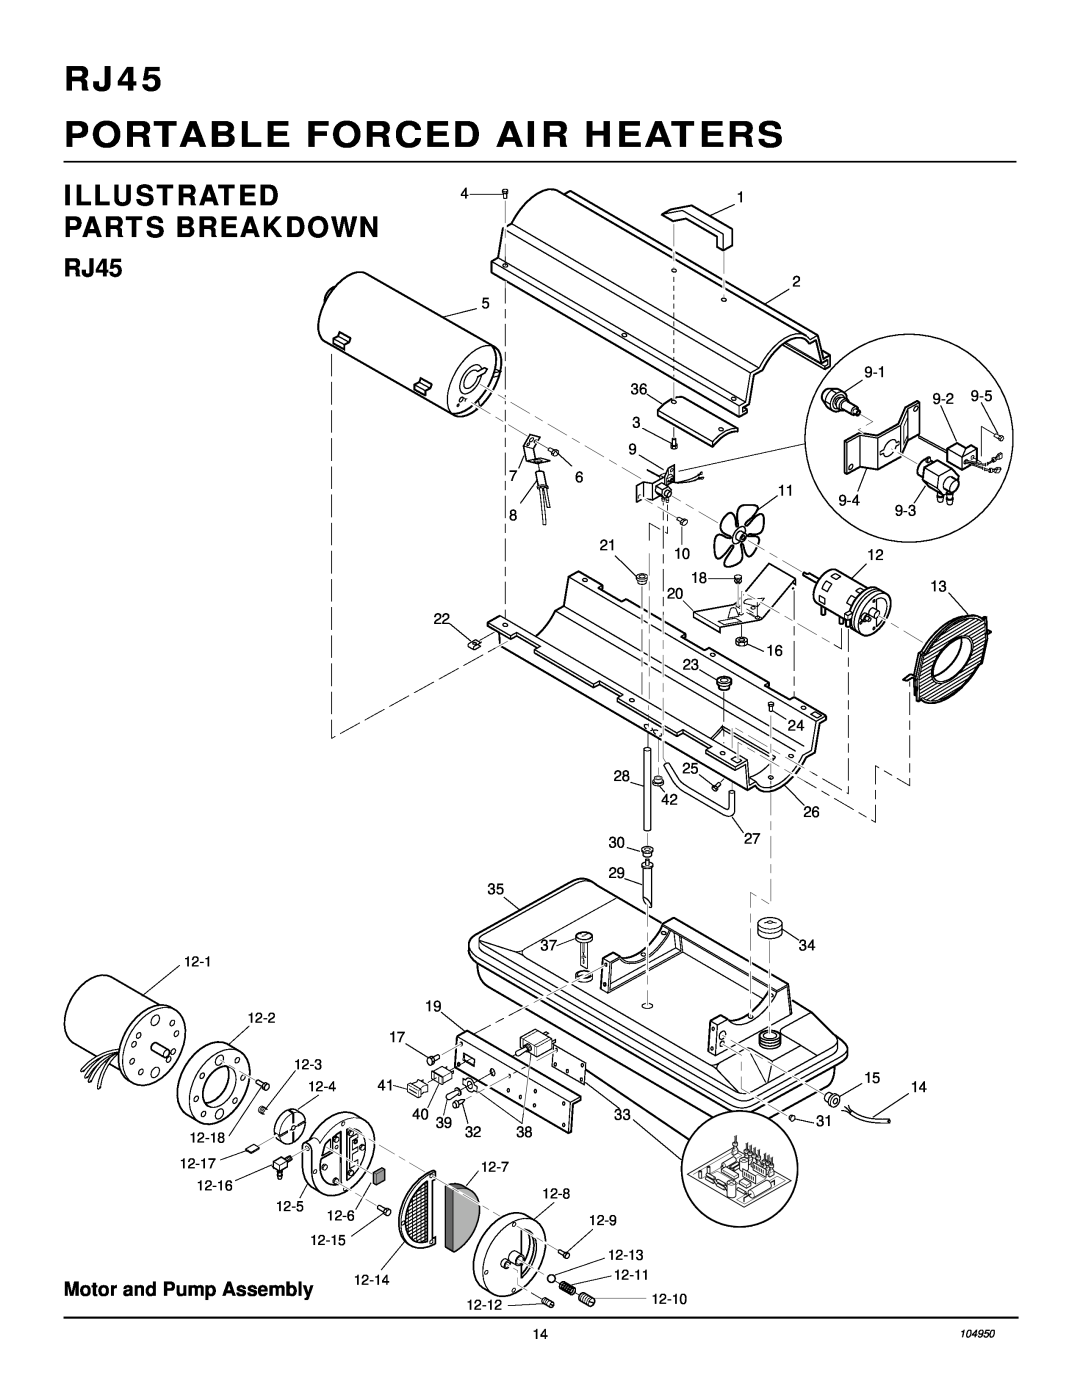 Desa RJ45, RJ70 owner manual Illustrated Parts Breakdown, Motor and Pump Assembly, Portable Forced Air Heaters 